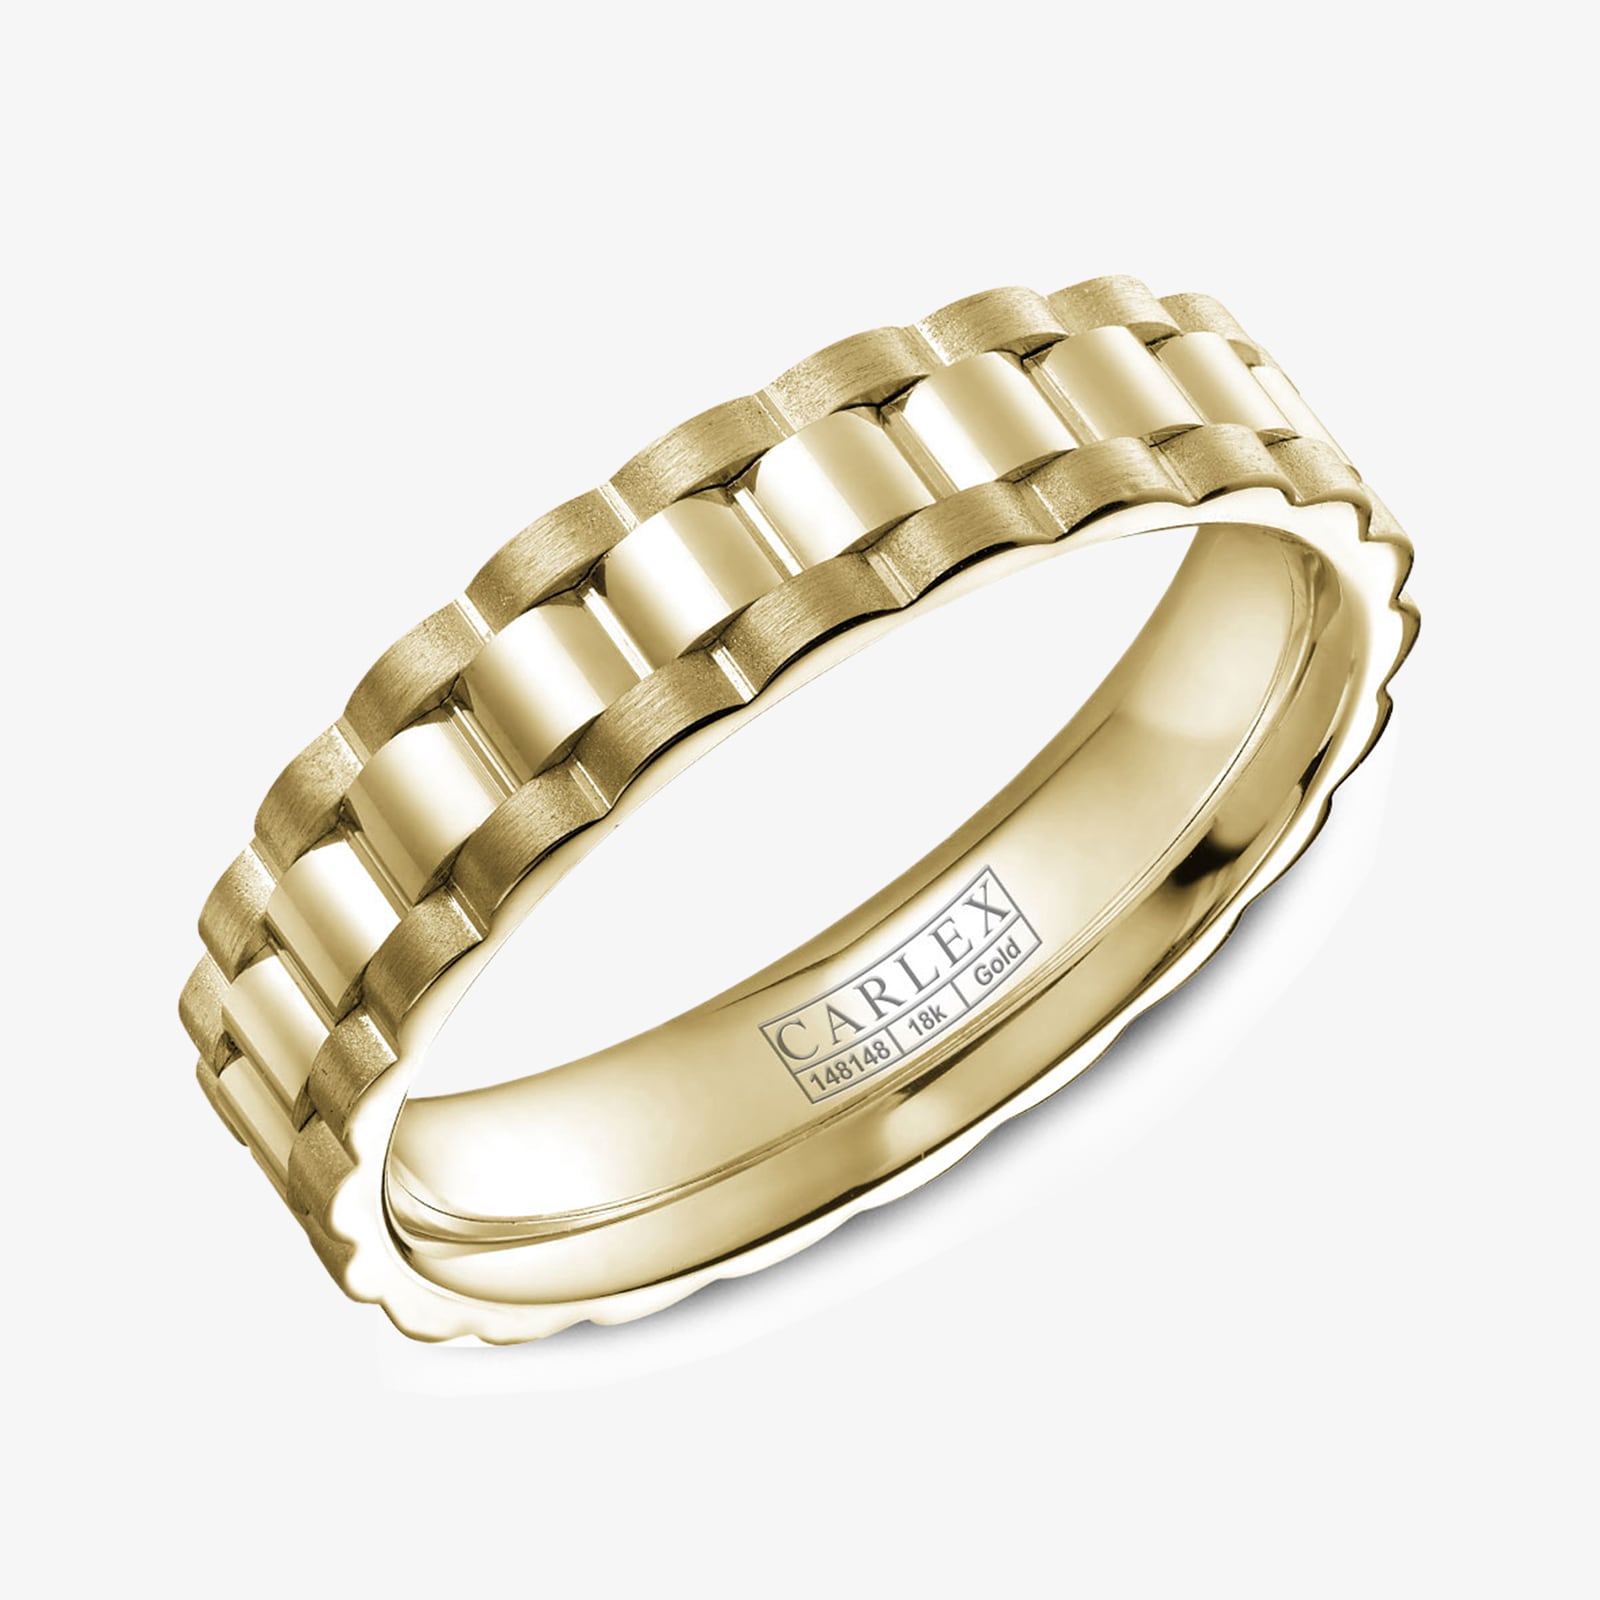 Click To View All Carlex Gold Jewelry